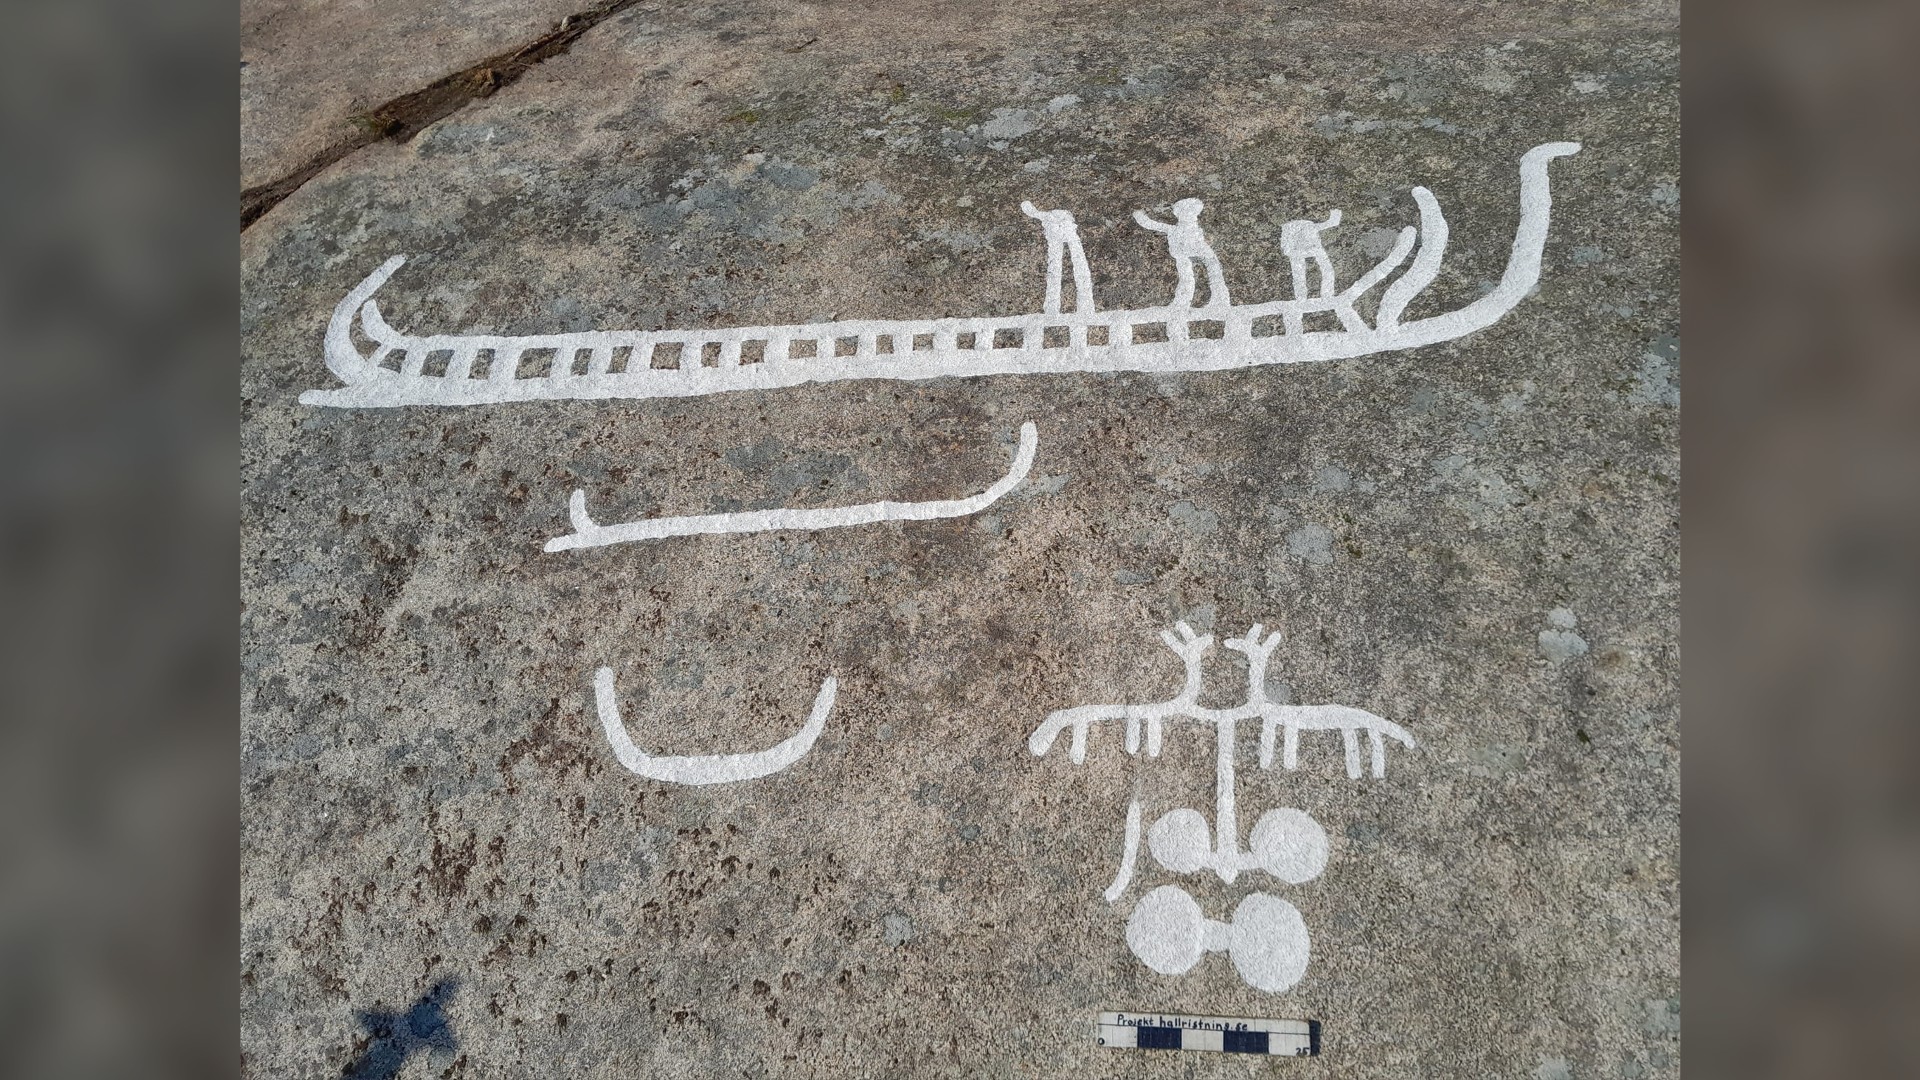 Some of the newly found petroglyphs can be seen in this photo. They were carved around 2,700 years ago. In this image we can see what looks like 3 human figures on a long boat. Underneath this there is an image of what looks like maybe 2 horses pulling a cart with 4 wheels.